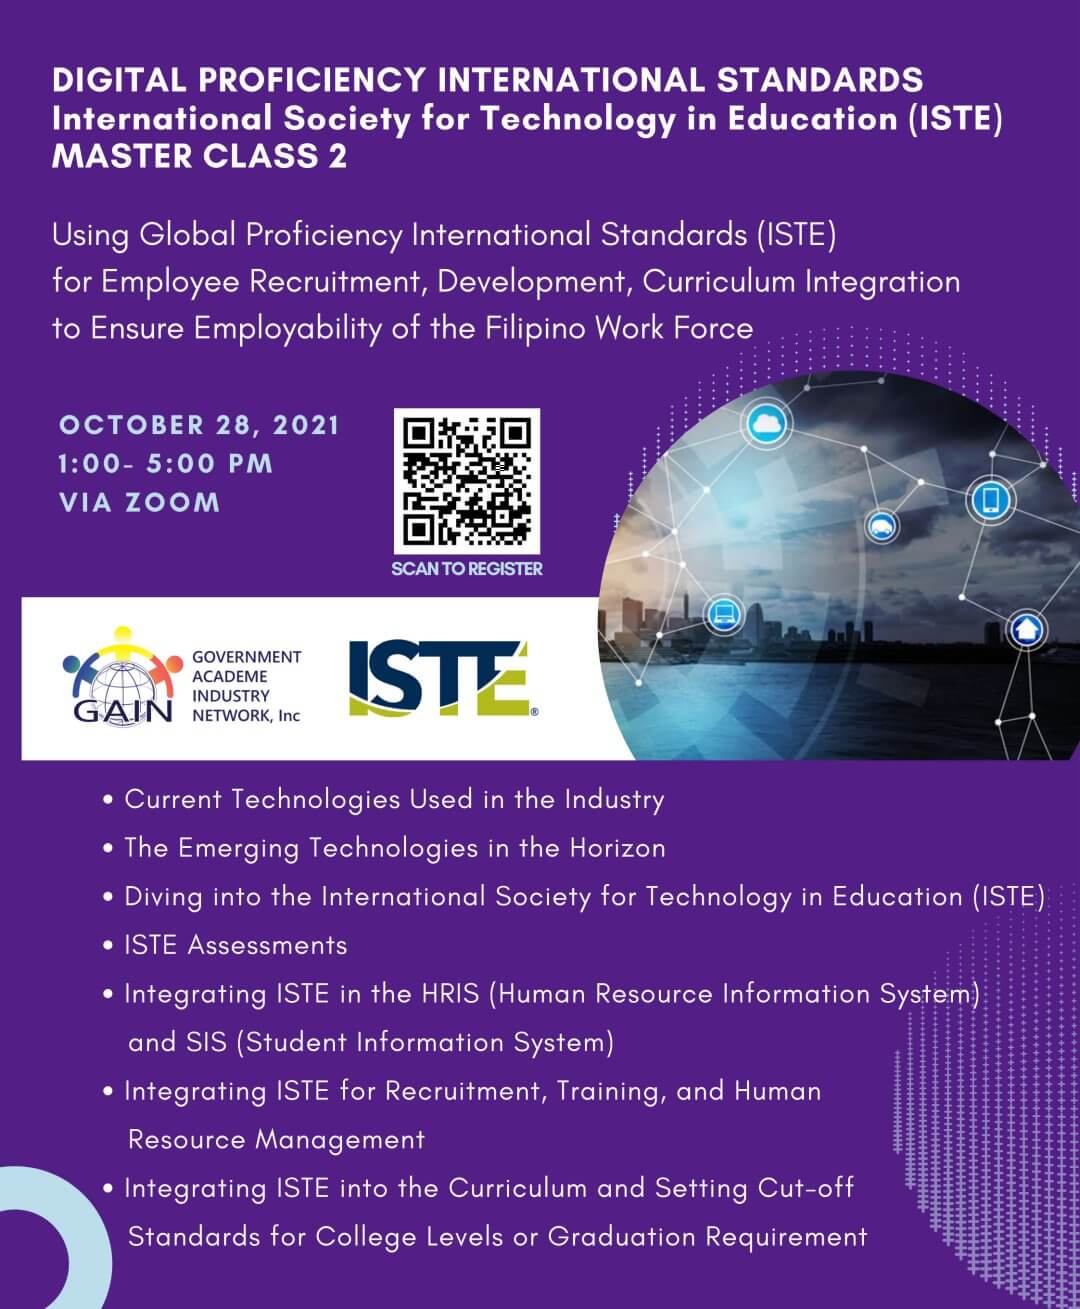 GAIN - Using Global Proficiency International Standards (ISTE) for Employee Recruitment, Development, Curriculum Integration to Ensure Employability of the Filipino Work Force (October 28, 2021 1-5PM)